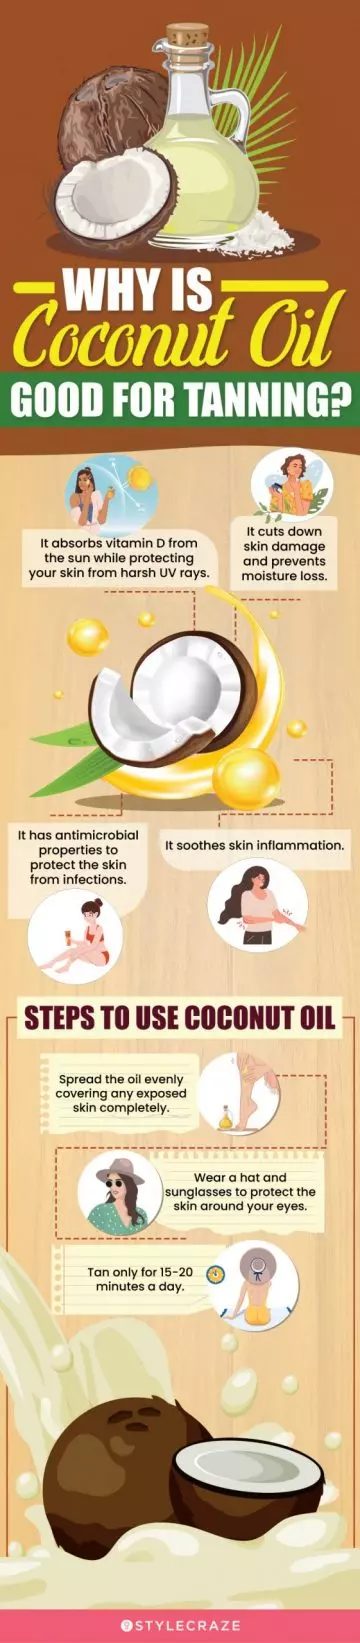 why is coconut oil good for tanning (infographic)